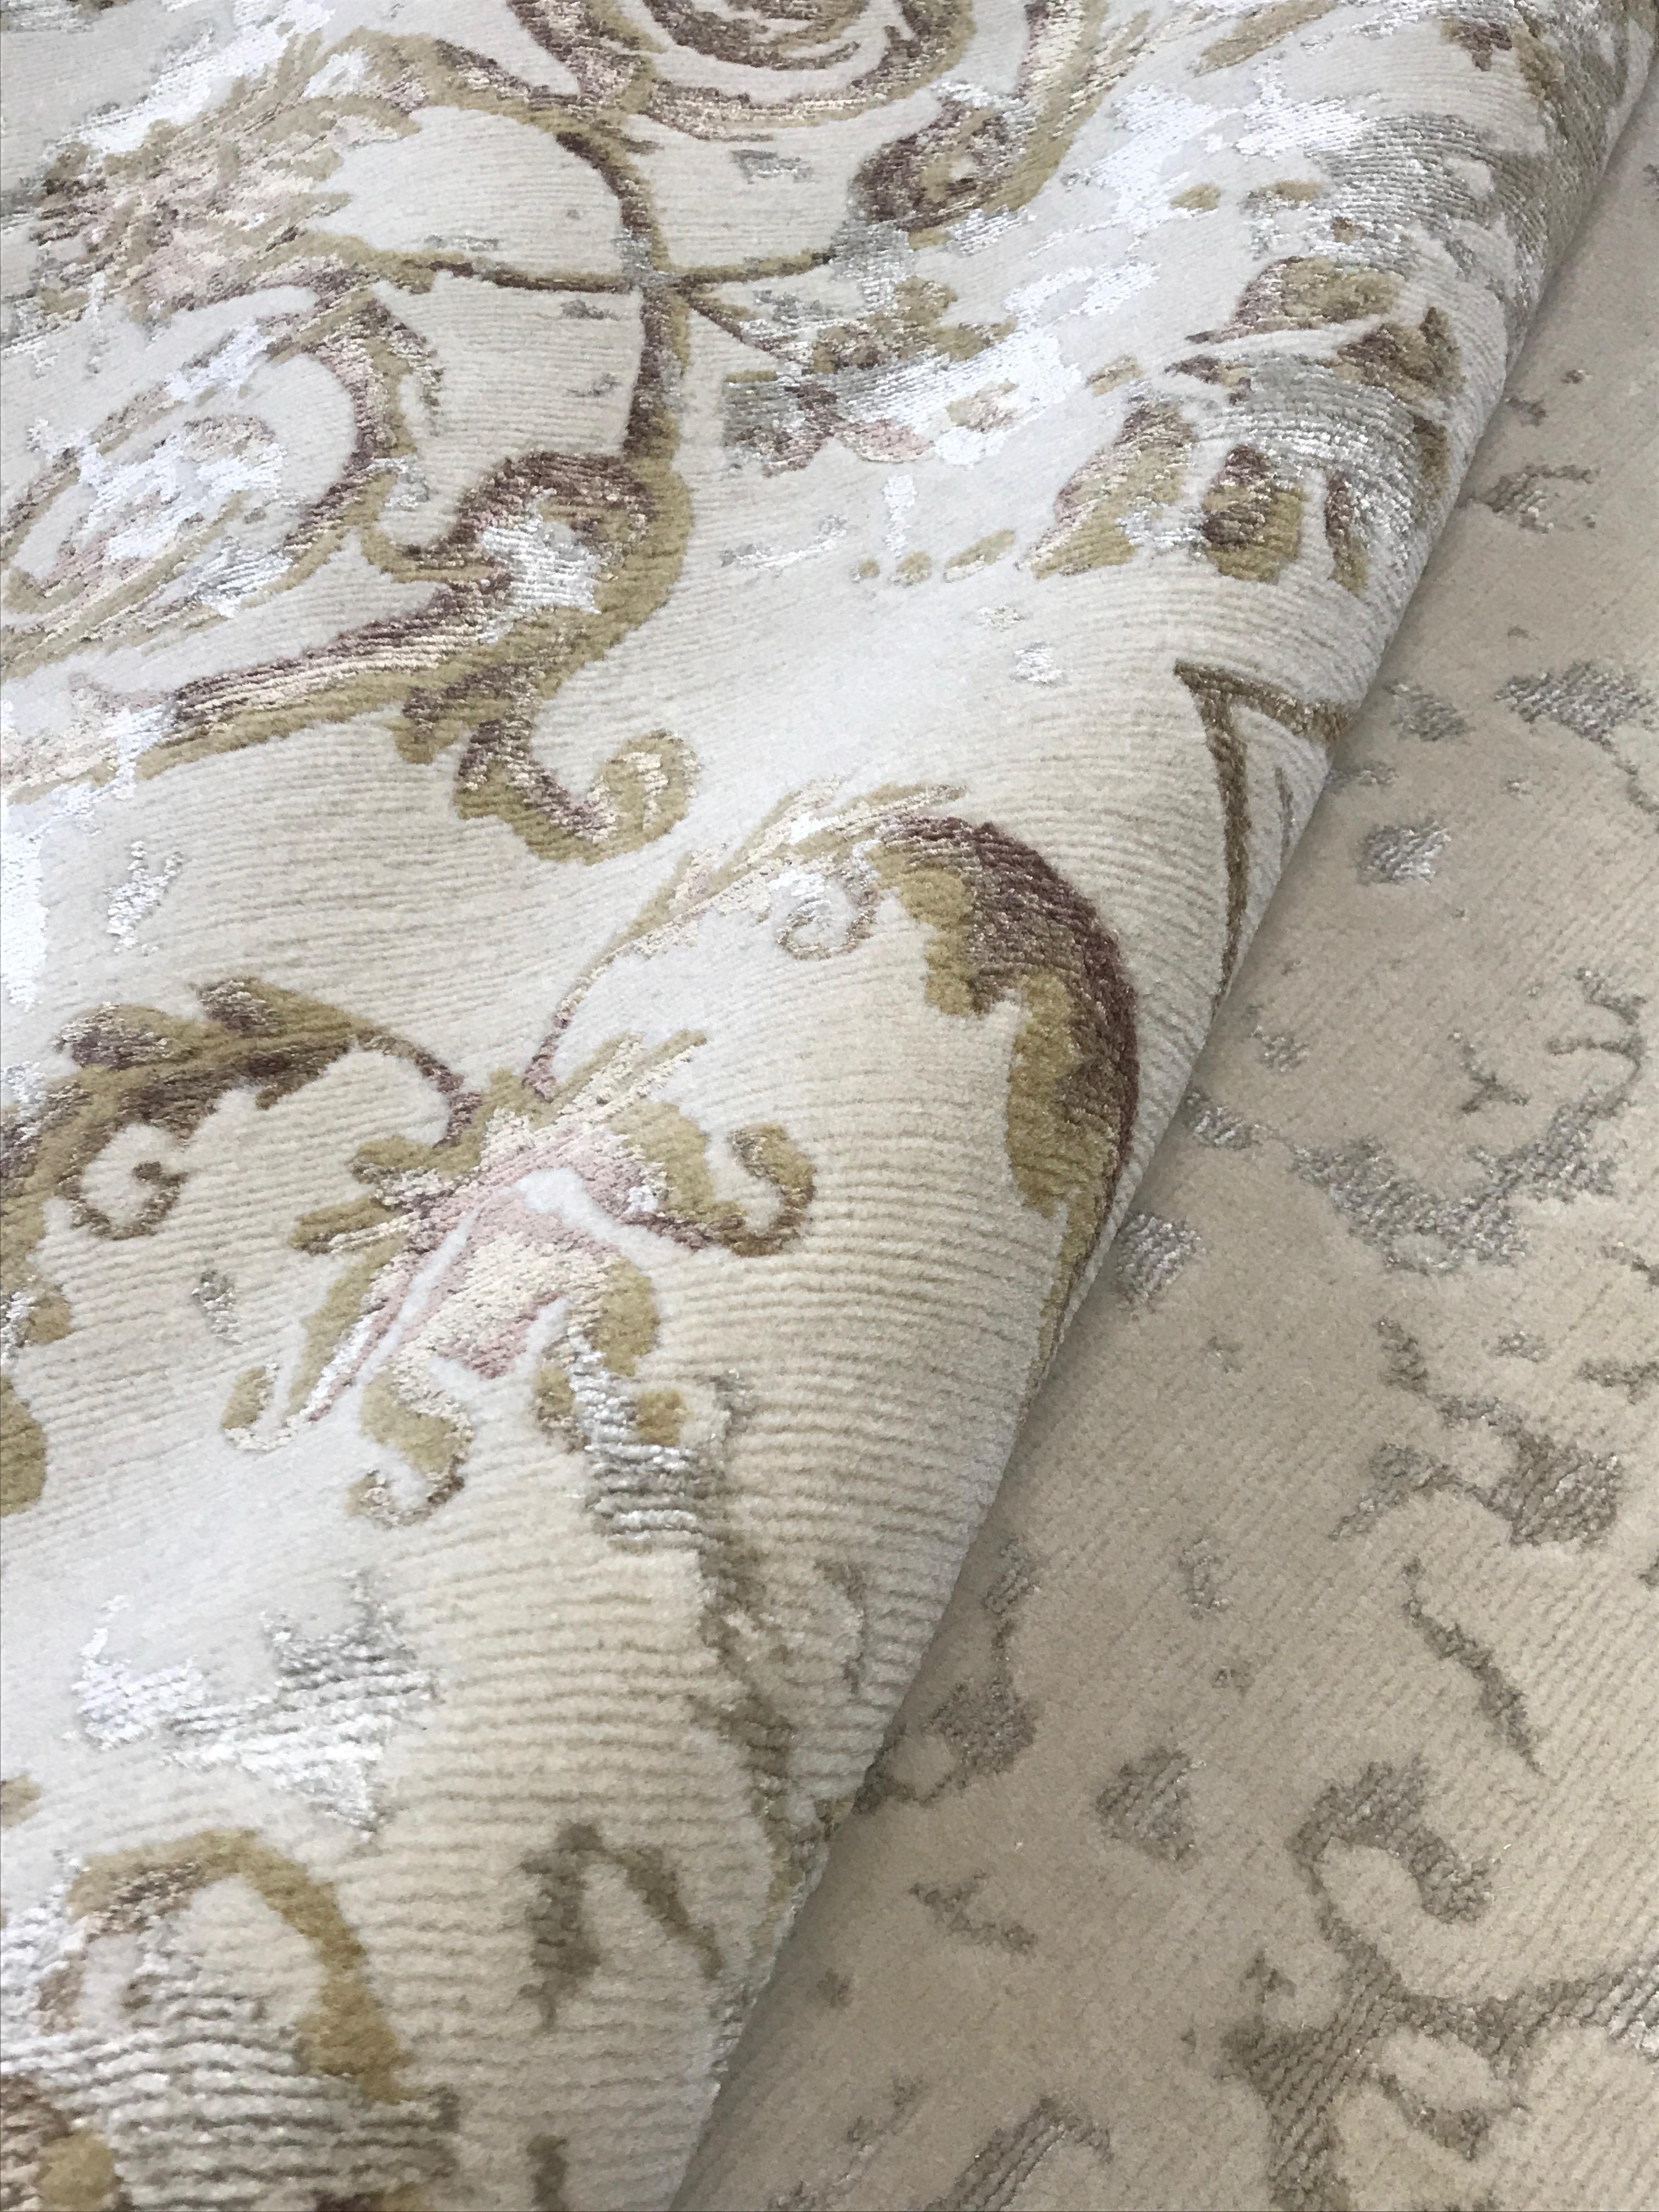 Modern Classics collection is a contemporary approach to timeless patterns from Persian damasks to French floral ornaments, presented in up-to-date color schemes. The collection evokes a feeling of antiquity and historical traditions. With its cold